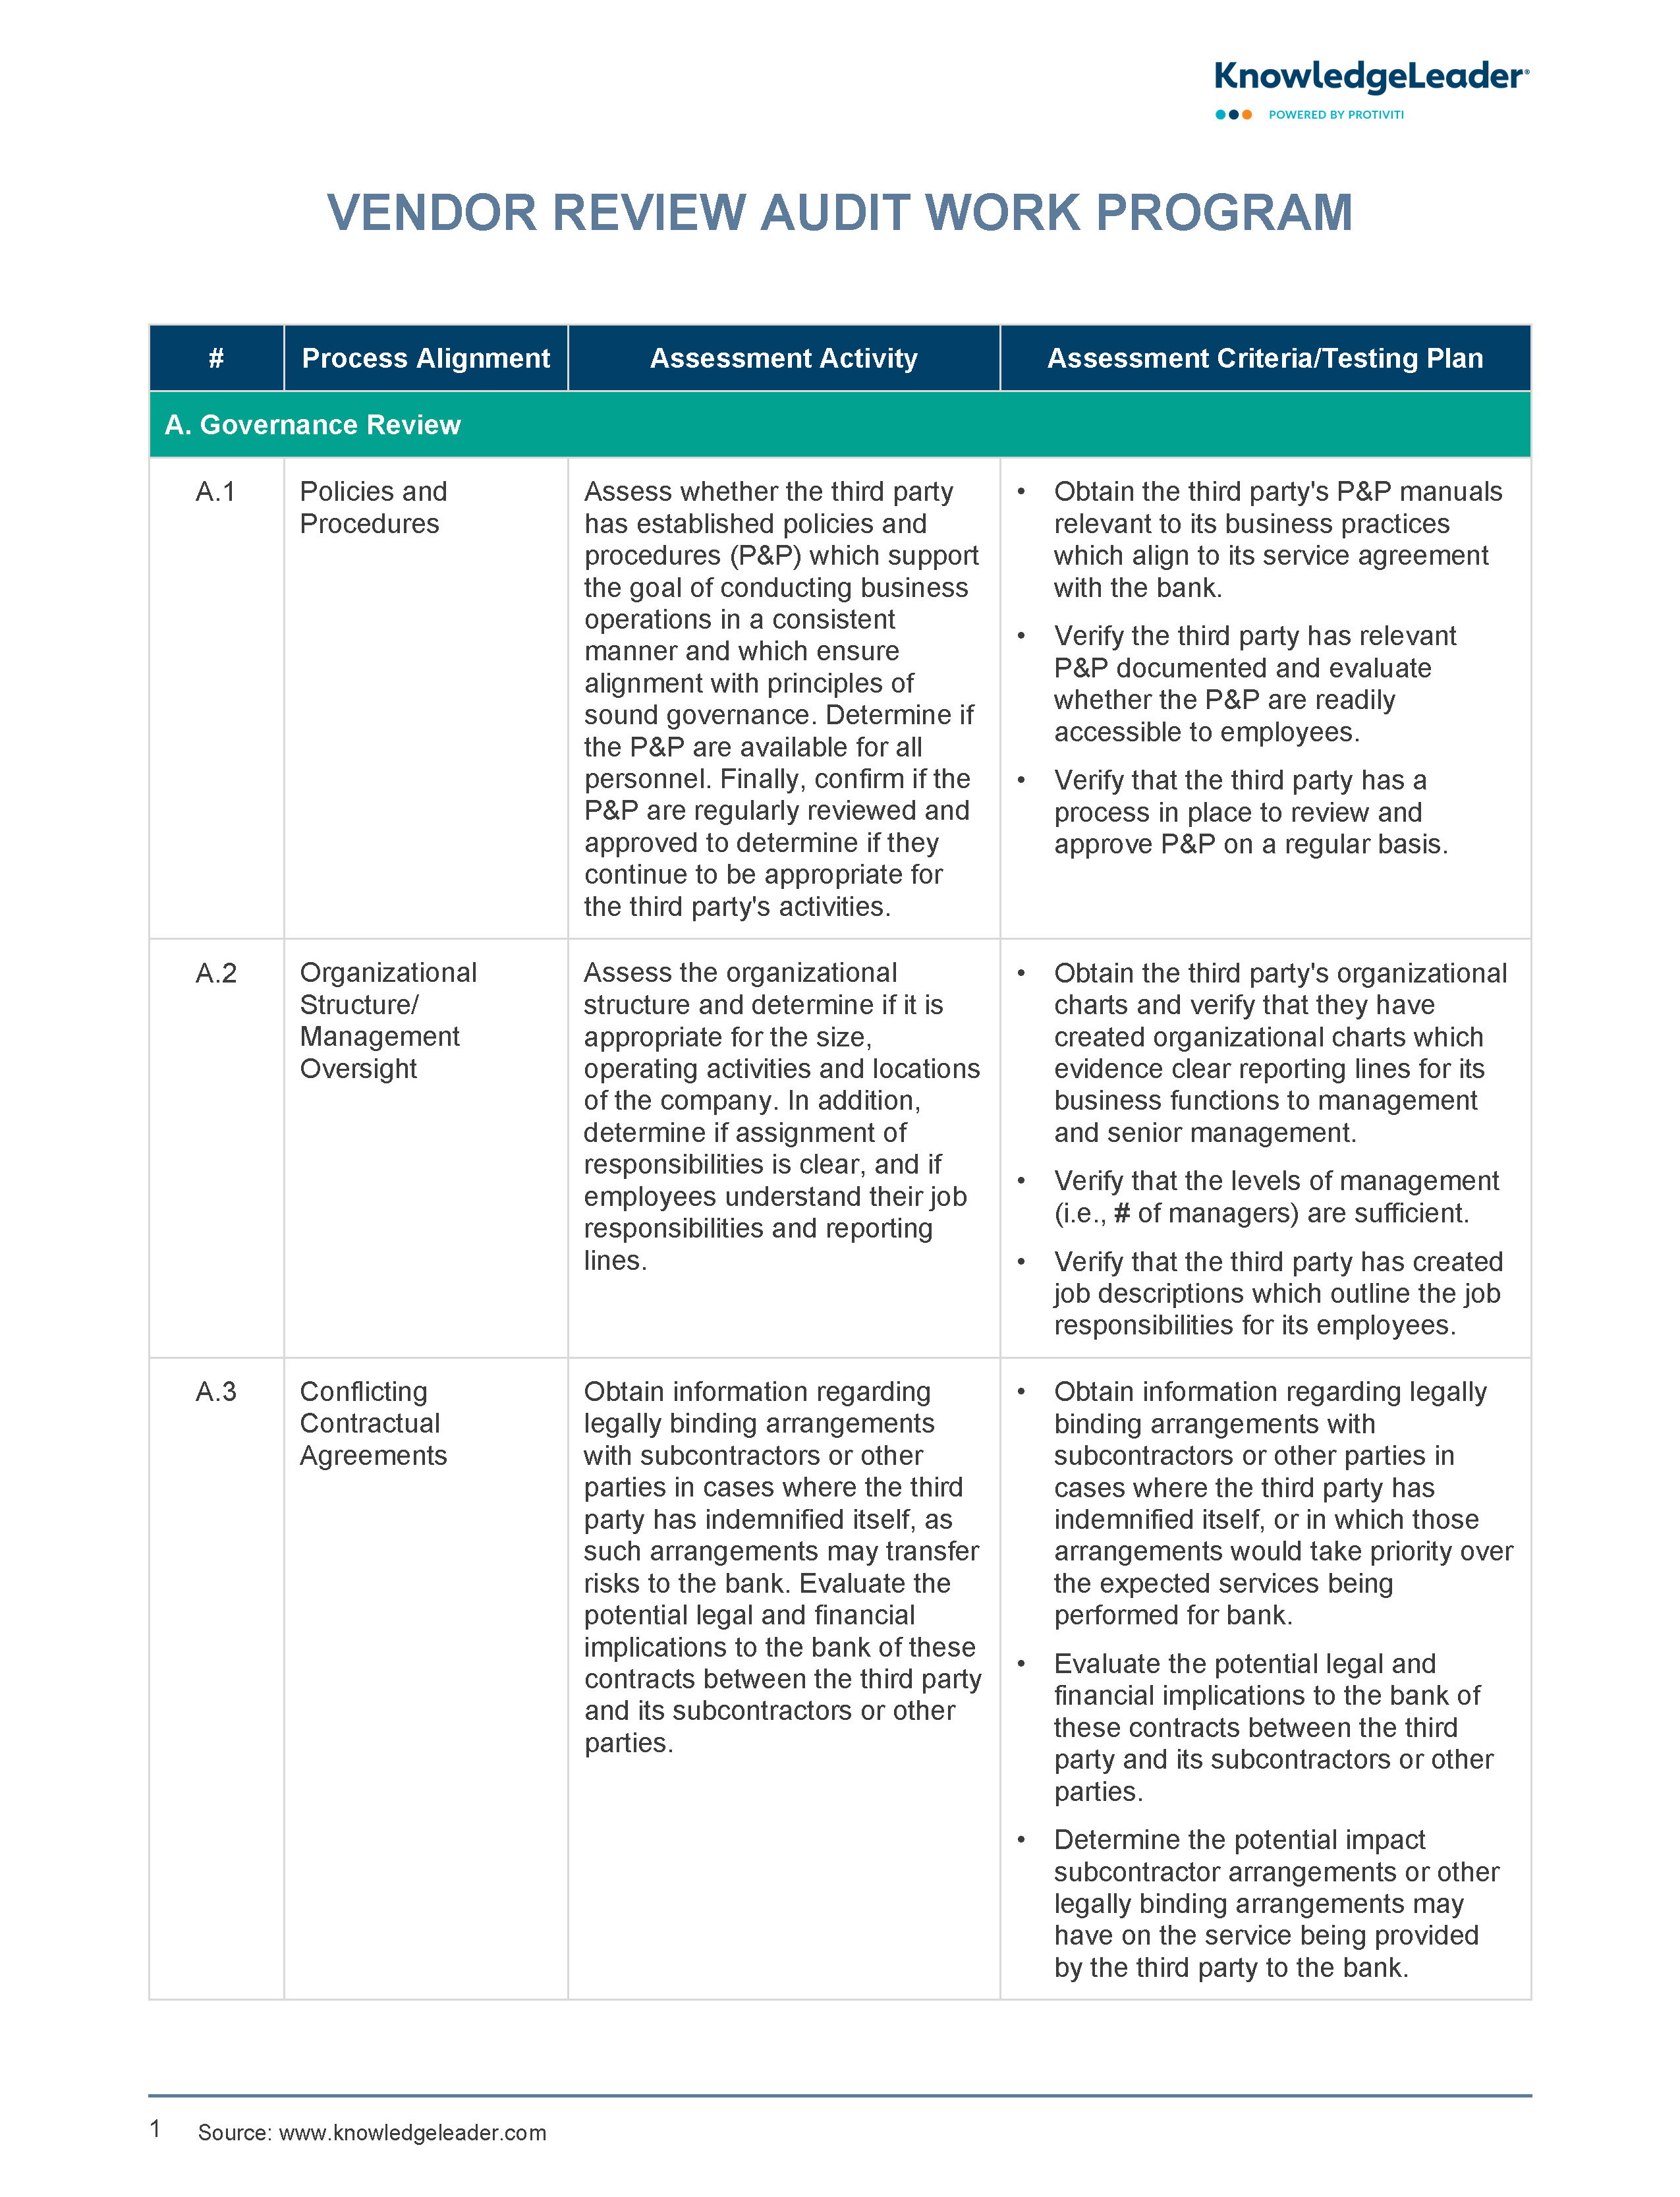 Screenshot of the first page of Vendor Review Audit Work Program